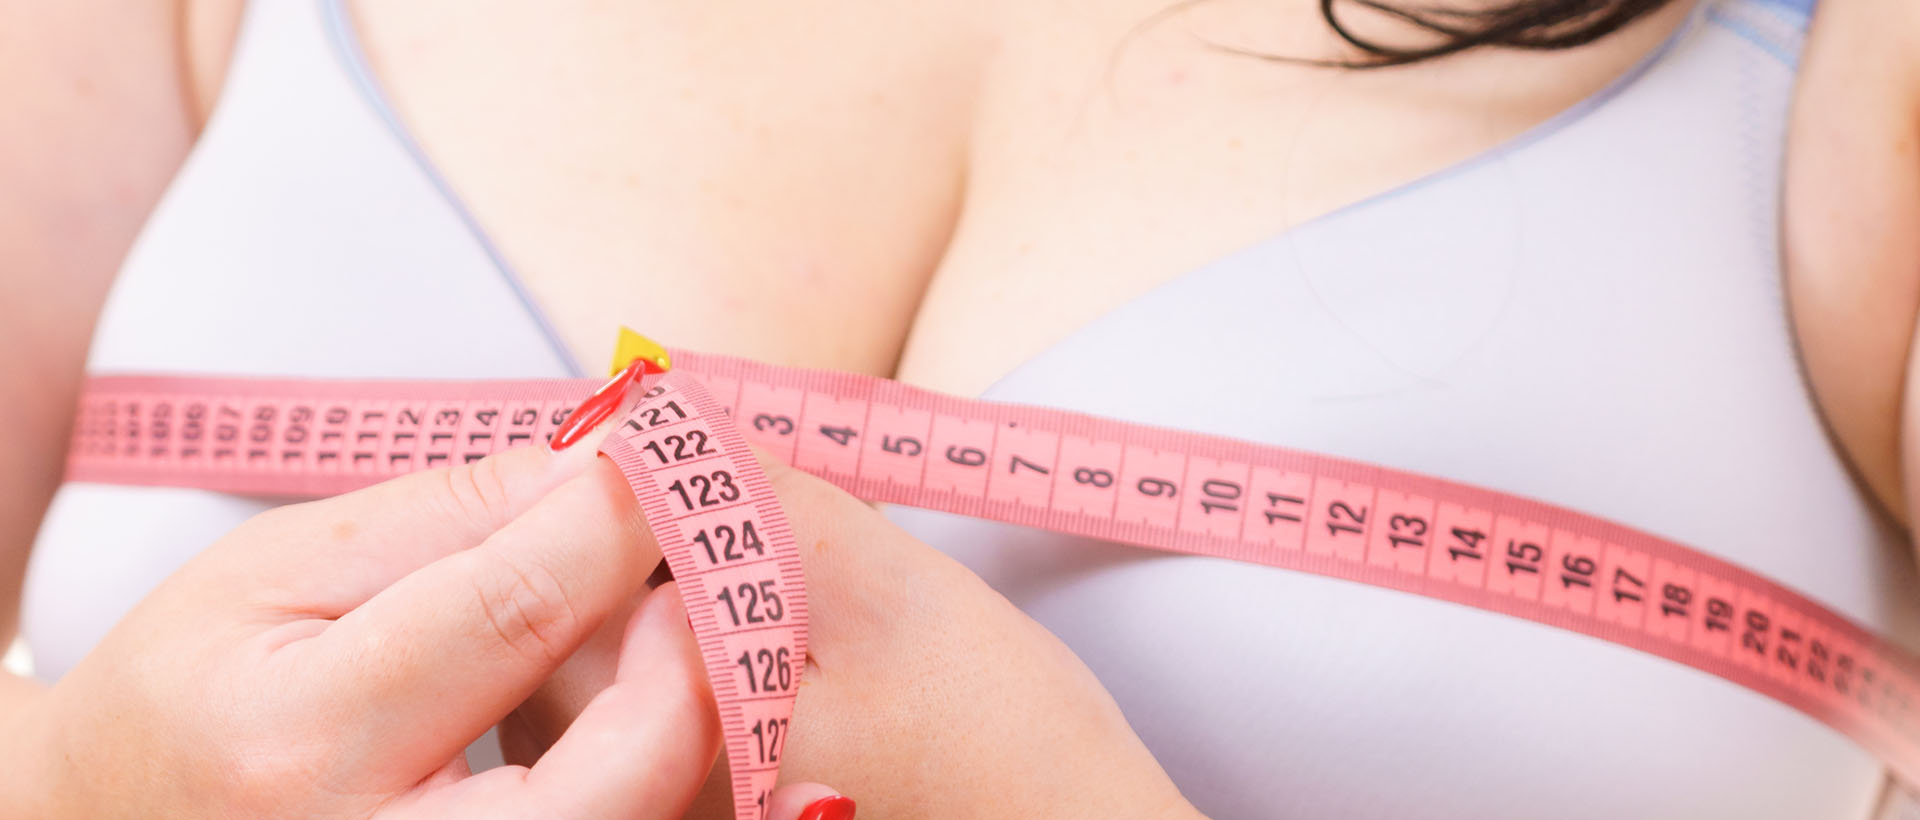 Closeup of female breasts, woman wearing bra using tape measure to check the measurements of her big chest.